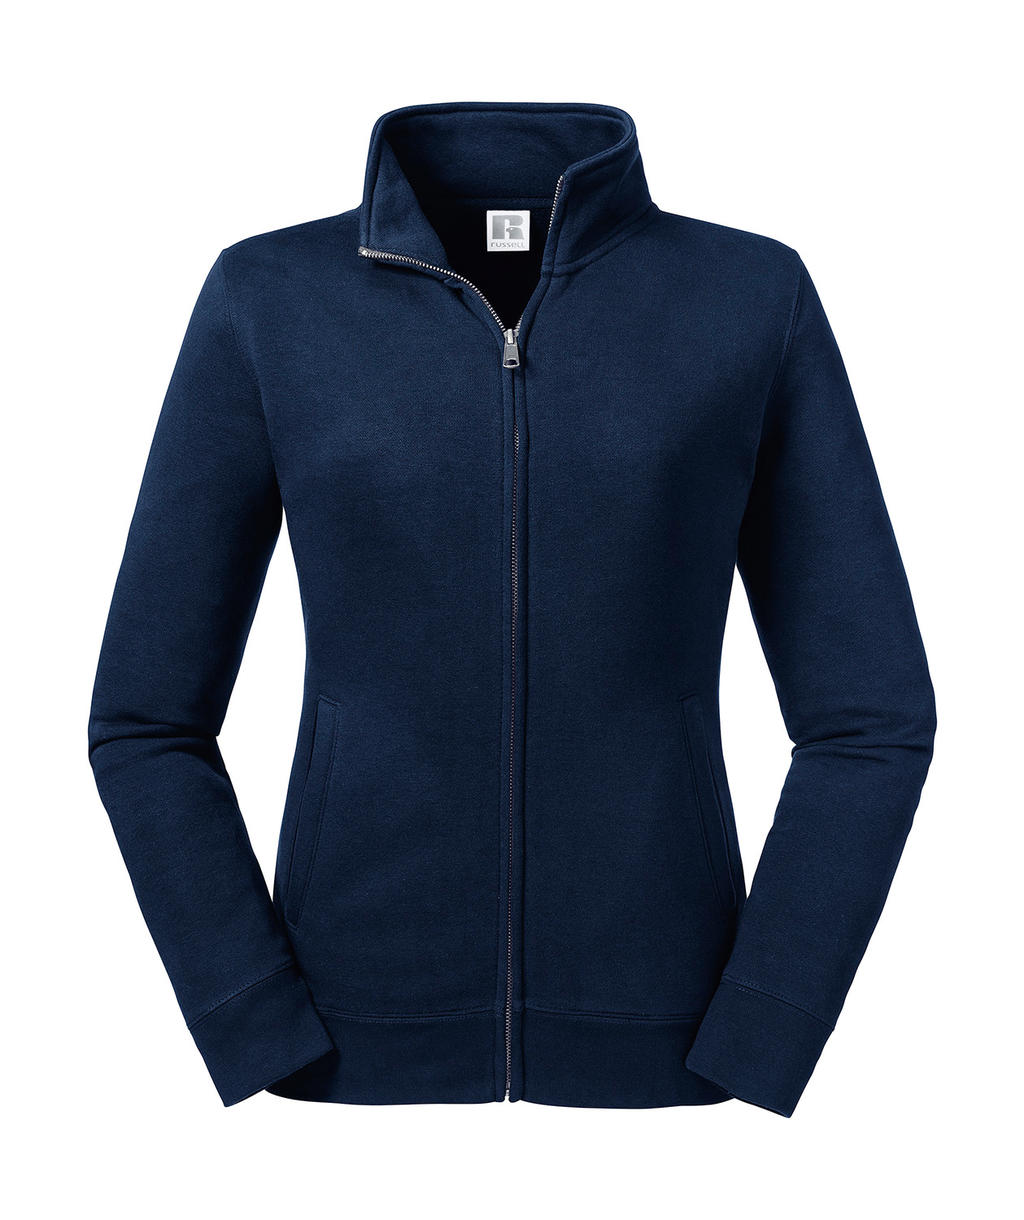  Ladies Authentic Sweat Jacket in Farbe French Navy